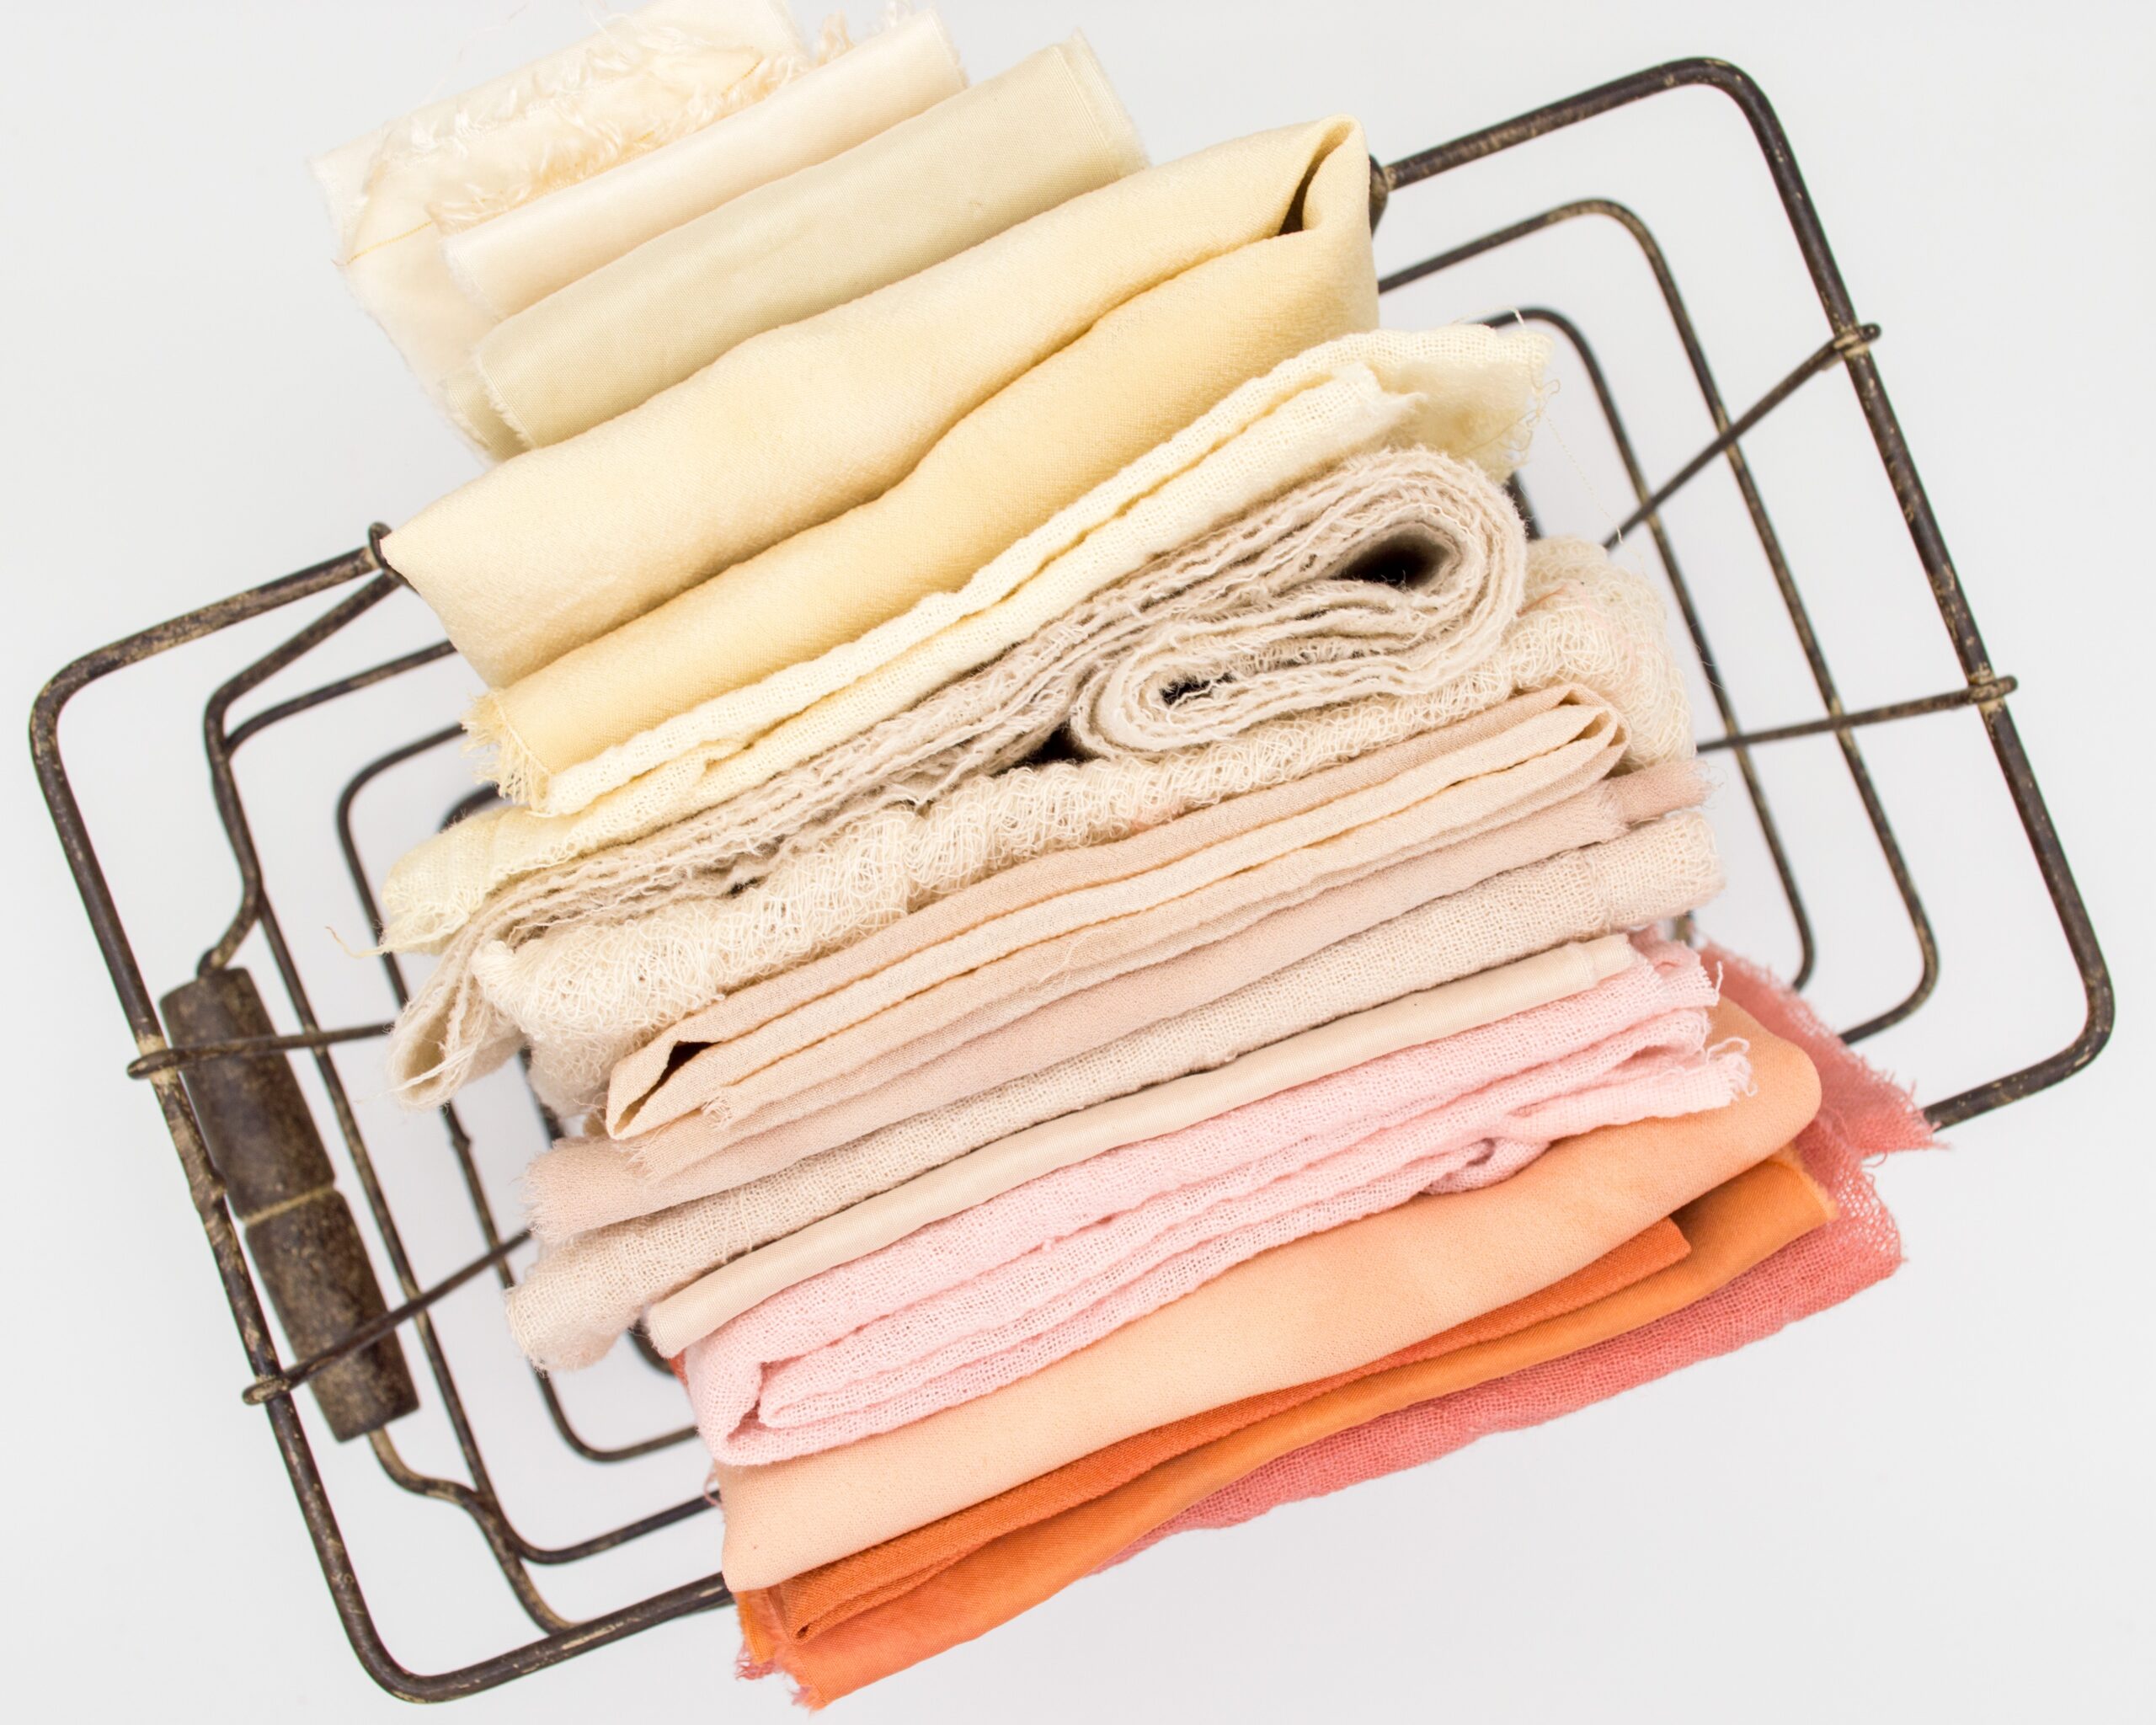 What Clothing Items Should Be Dry Cleaned?